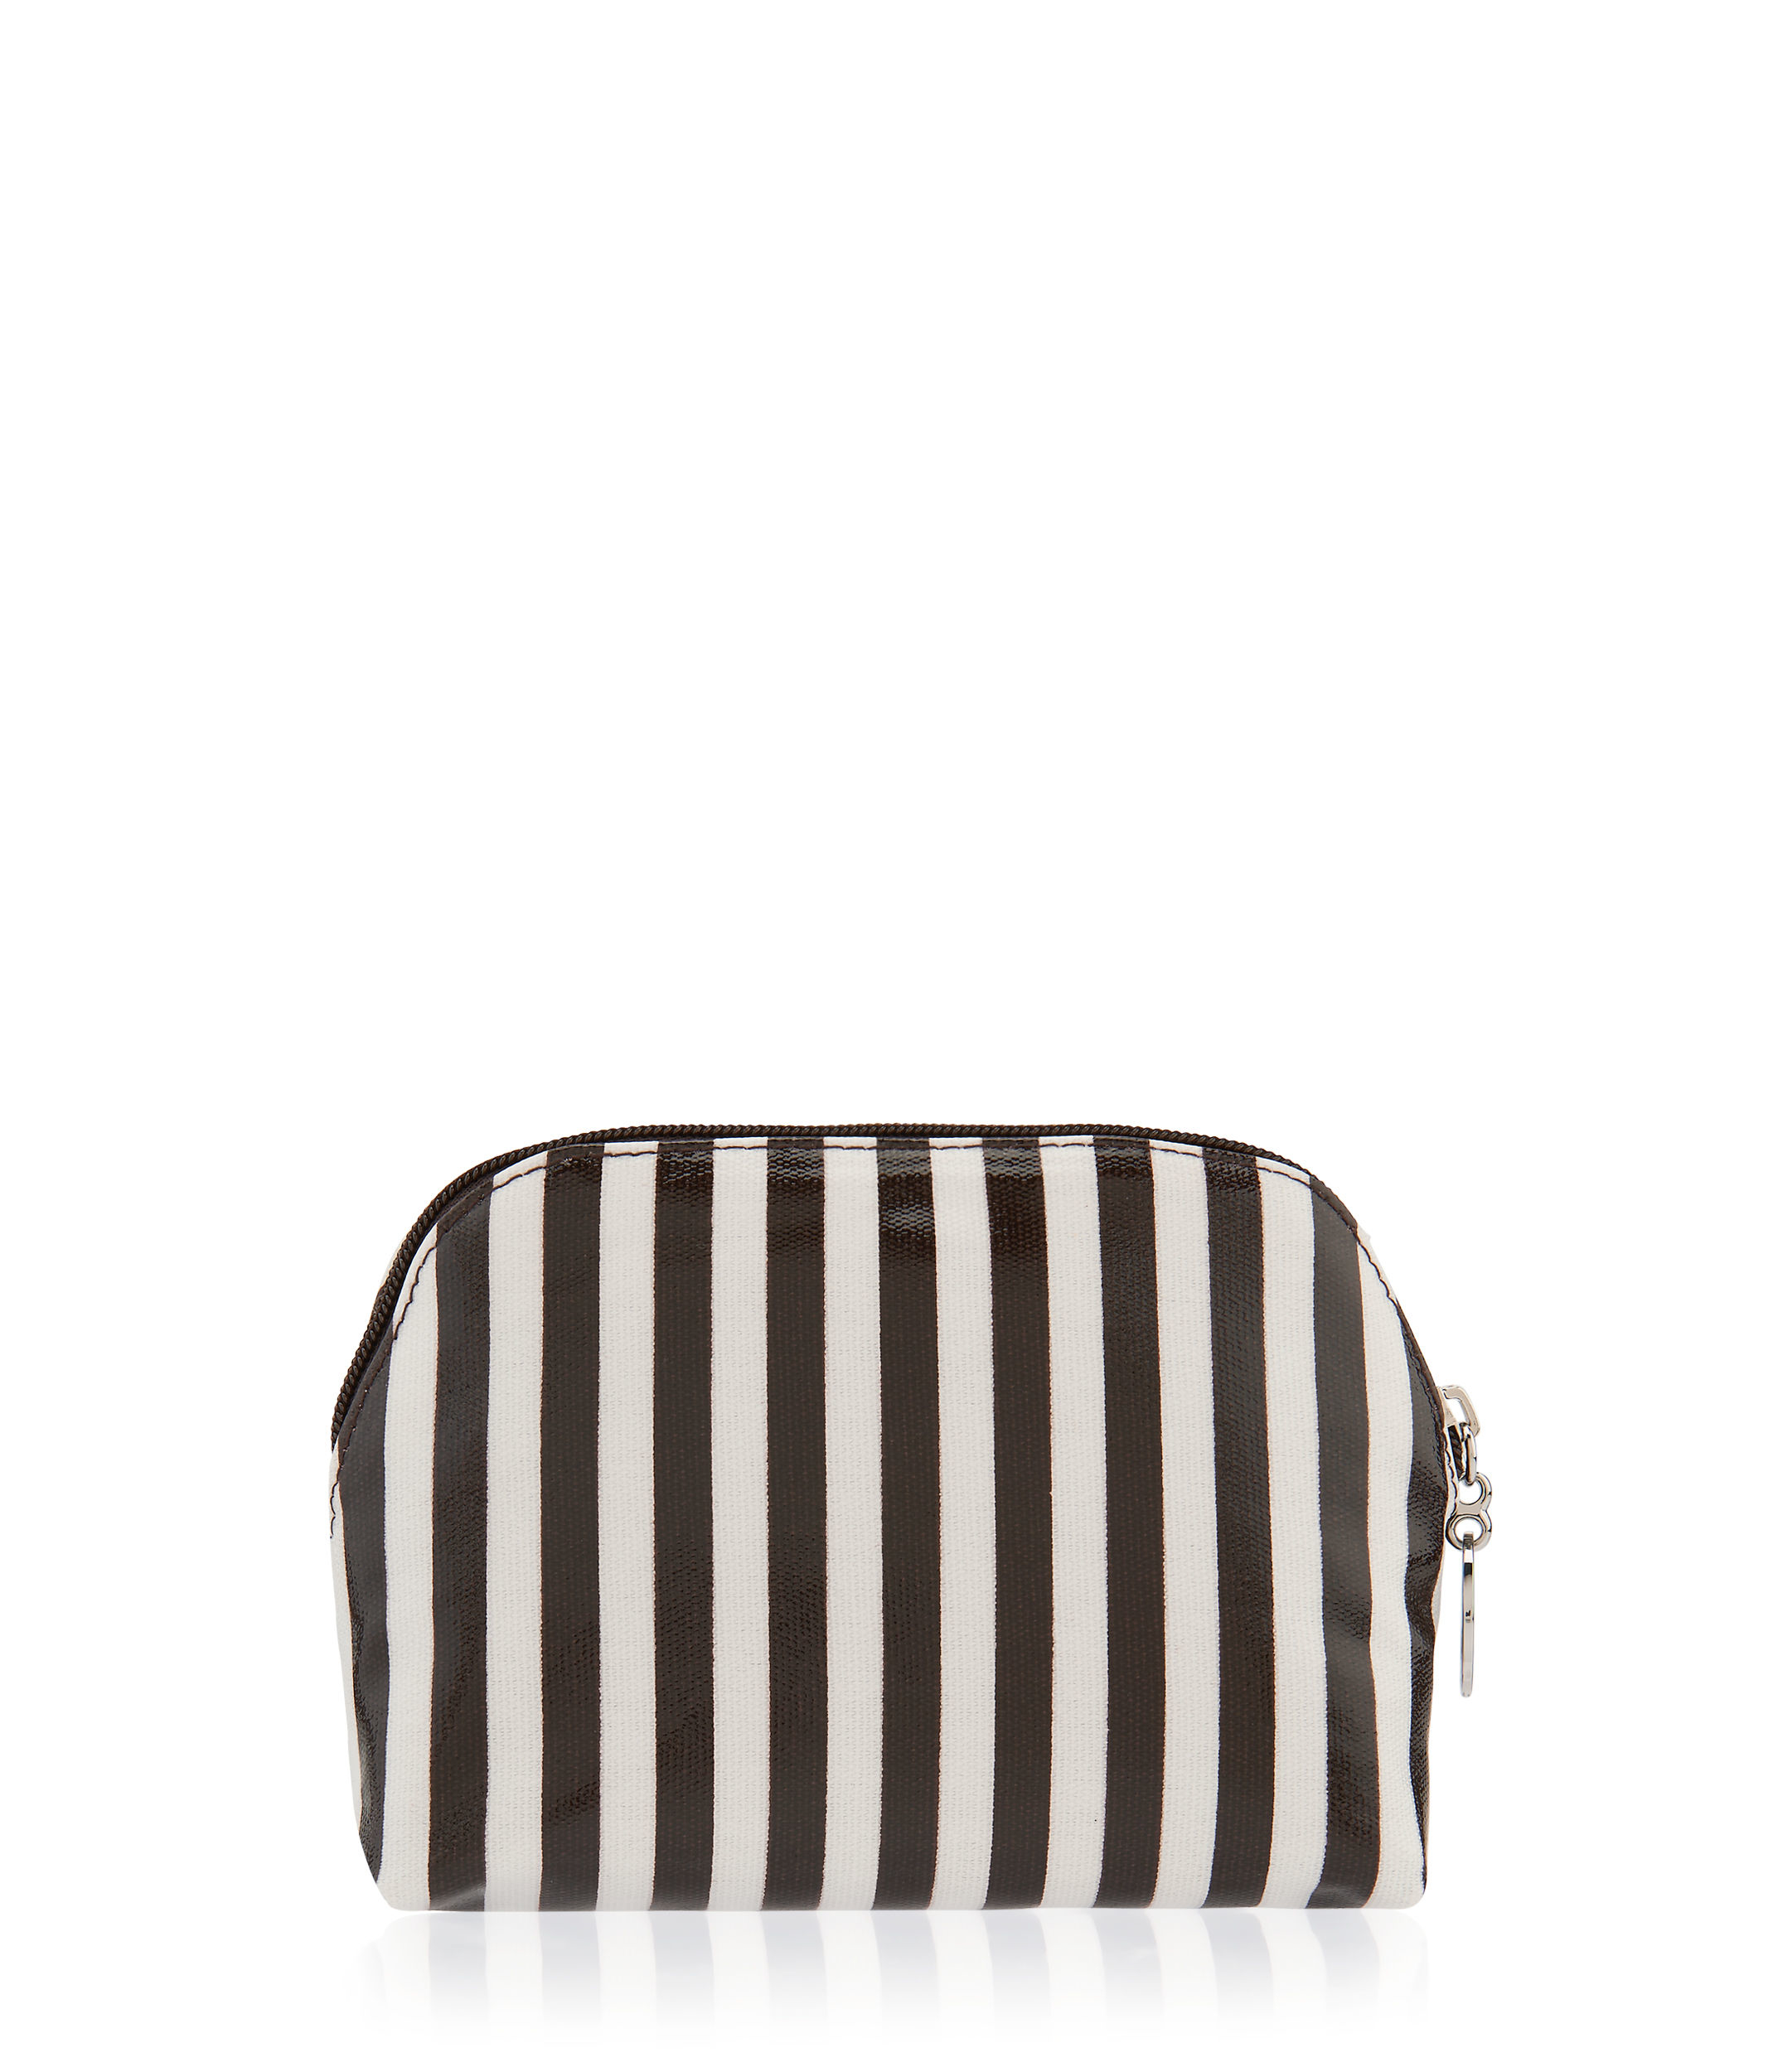 Lyst - Henri Bendel New Brown & White Dome T Gusset Cosmetic Bag in White